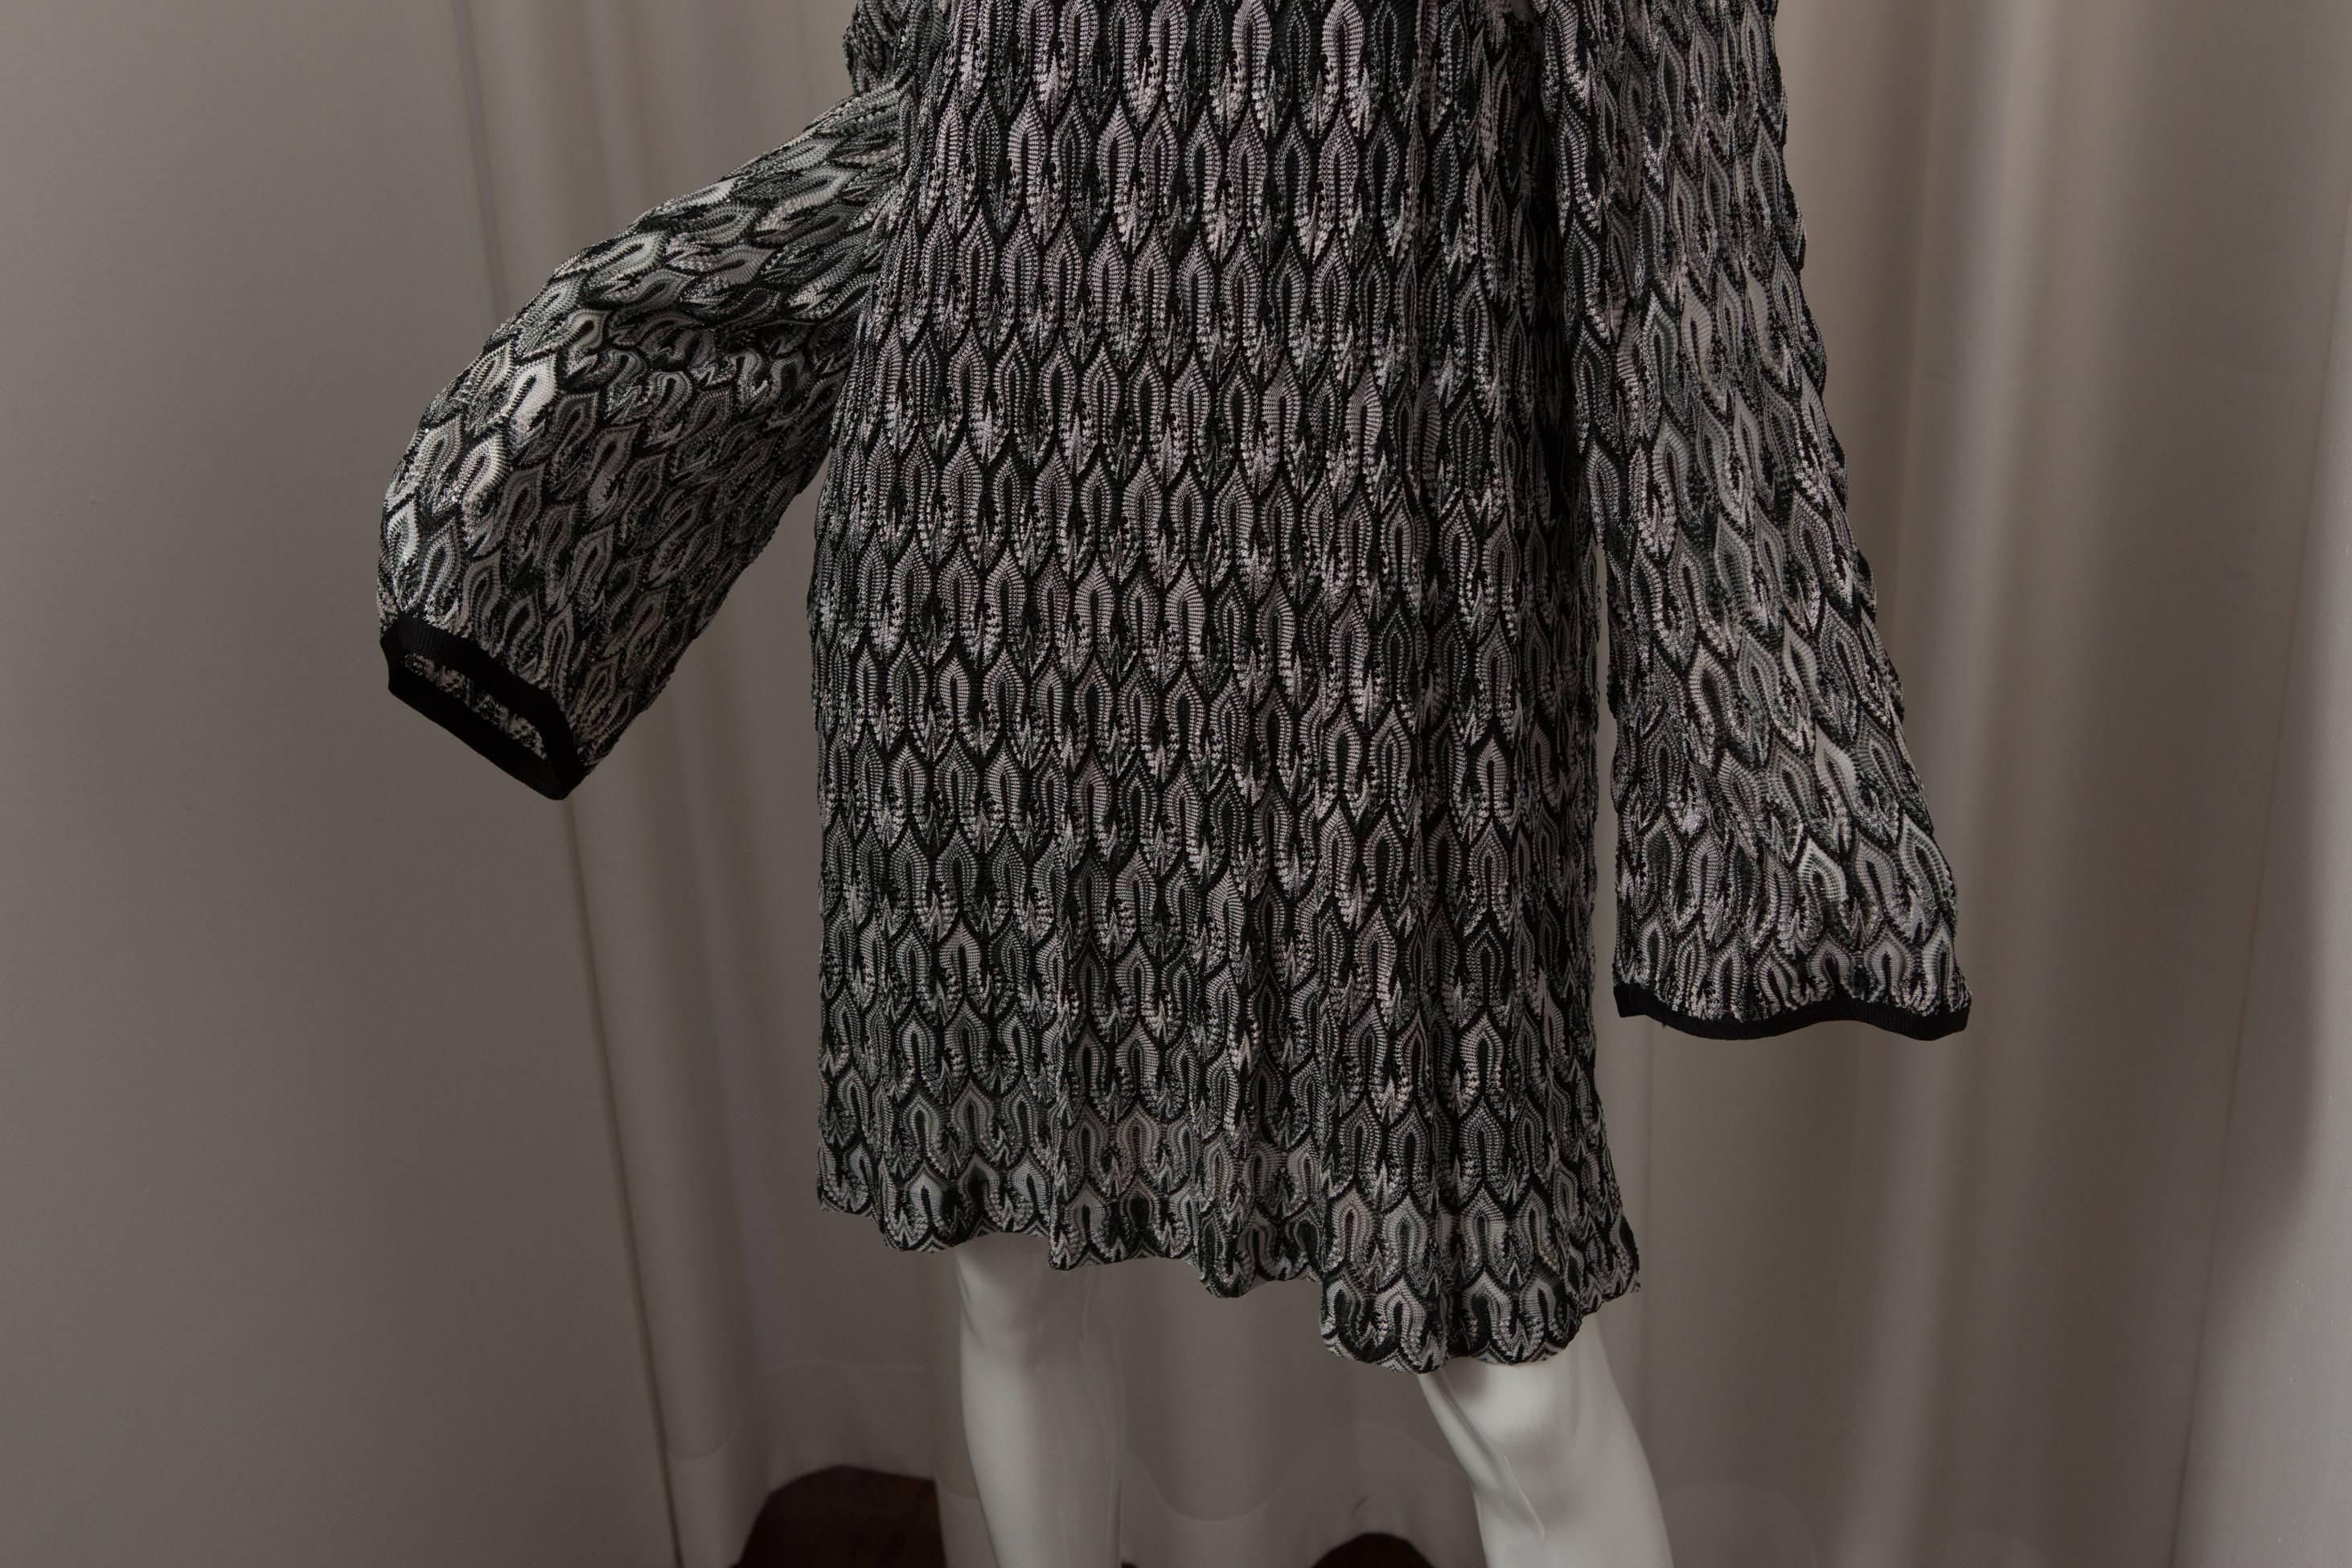 Rayon knit black and white shift dress with square neck detail.